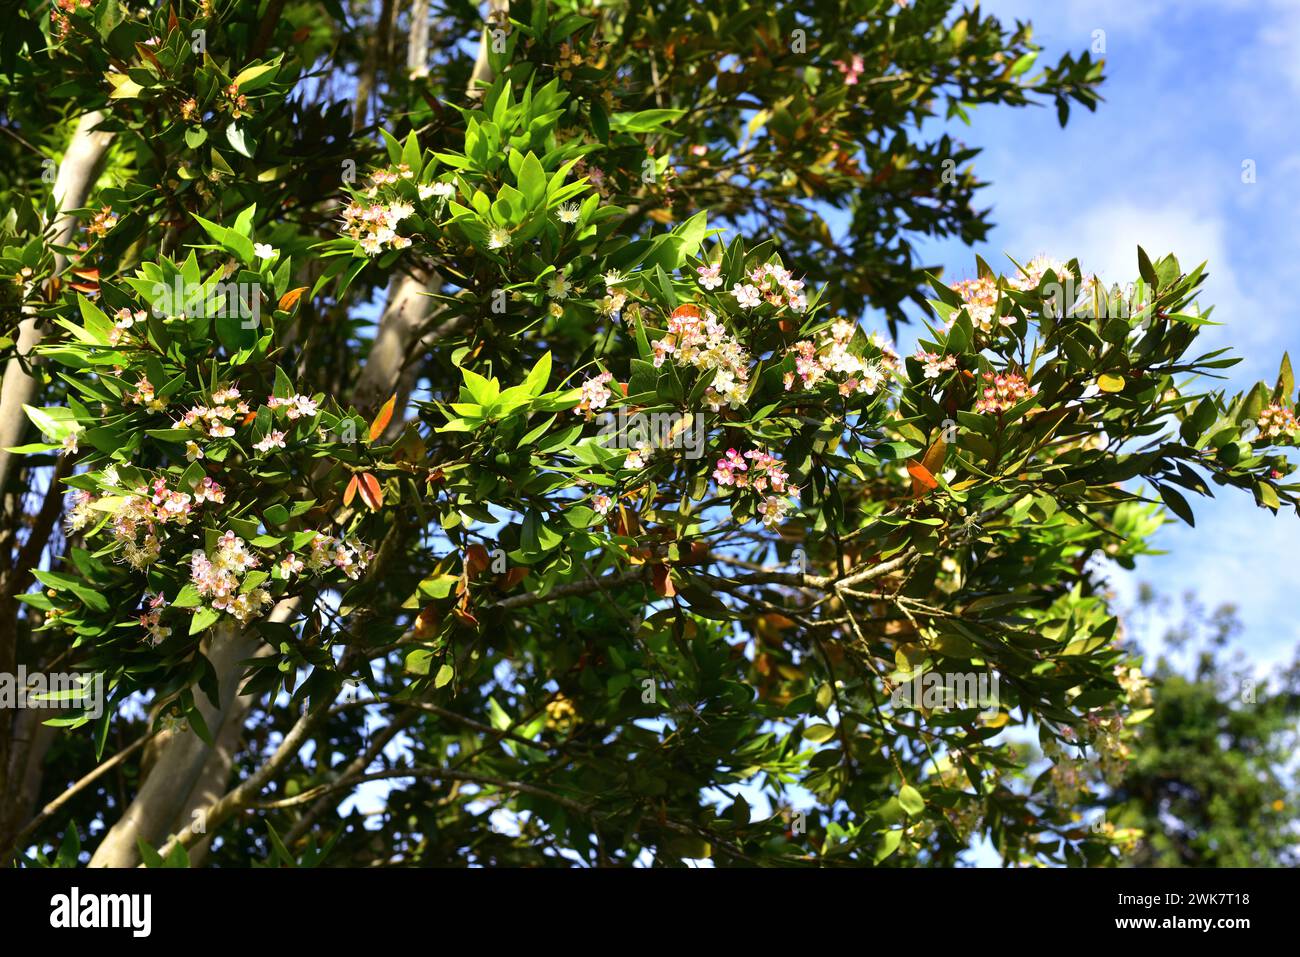 Arrayan chileno (Luma apiculata) is an evergreen tree native to temperate forests to Argentina and Chile. Flowers and leaves detail. This photo was ta Stock Photo